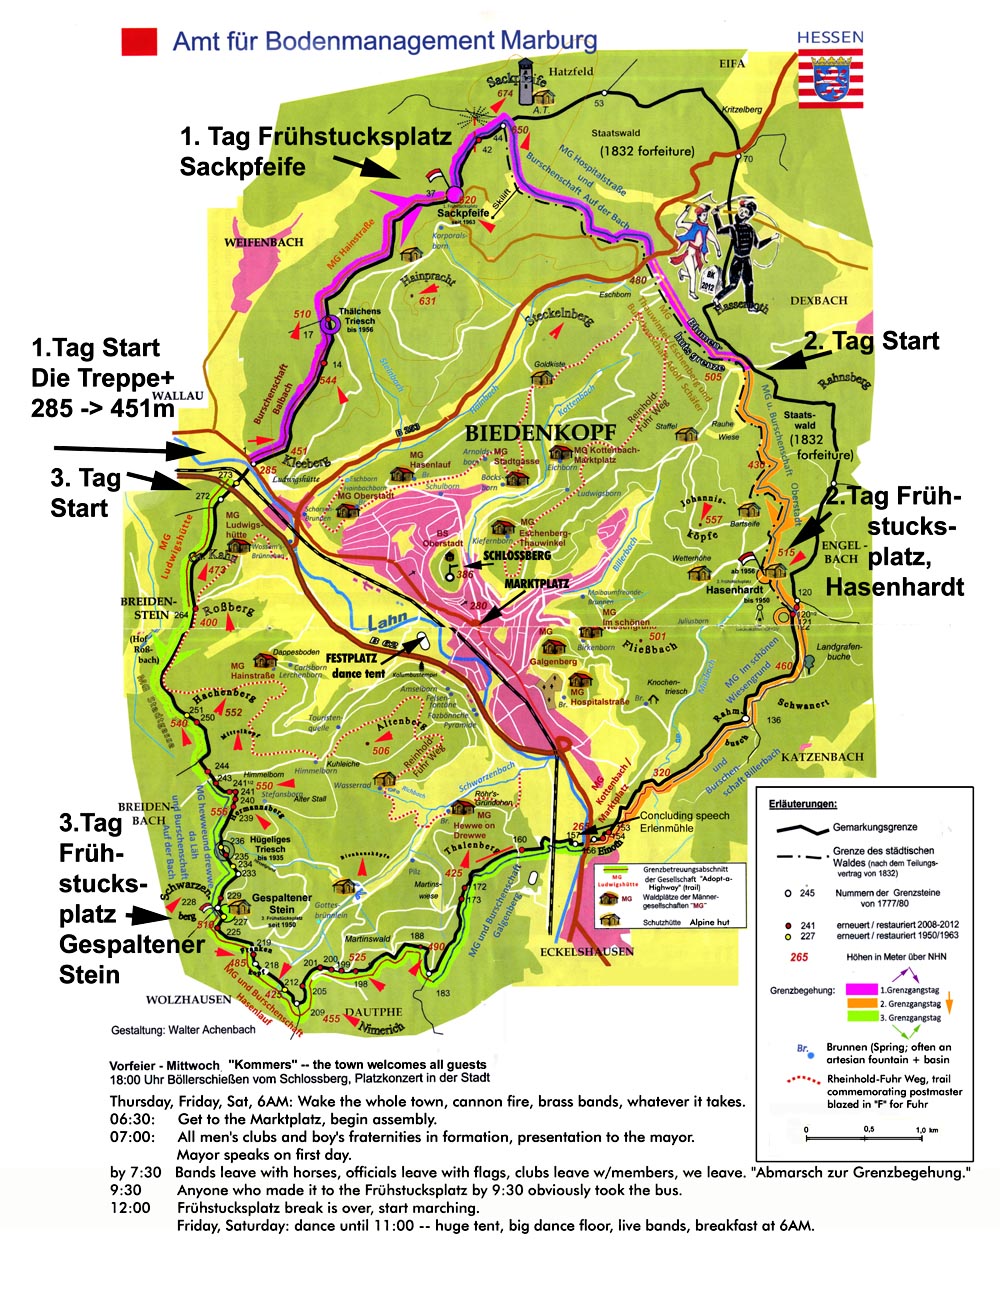 Map, overview of Biedenkopf Grenzgang terrirory and routes.